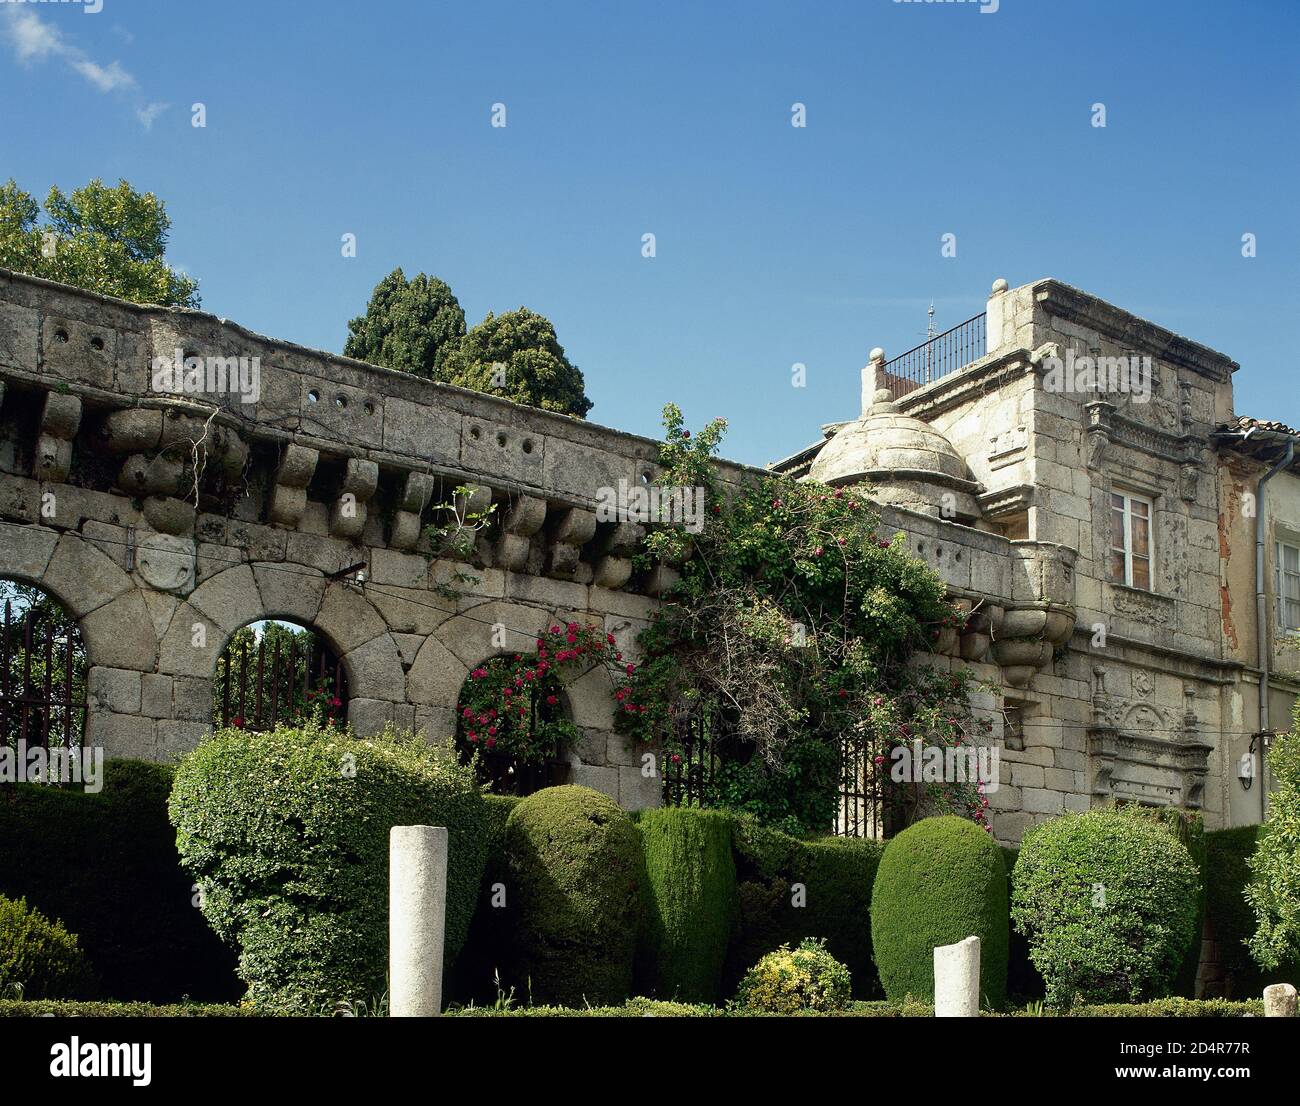 Spain, Community of Madrid, Cadalso de los Vidrios. Palace of Villena. It was built in 1423, on initiative of Alvaro de Luna, Duke of Trujillo and Constable of Castile, who used it as a summer residence. Renaissance style. It owes its name to the Marquis of Villena, Juan Fernandez Pacheco, who benefited from the fall from grace of Alvaro de Luna. Southern facade, with semicircular arches. Stock Photo